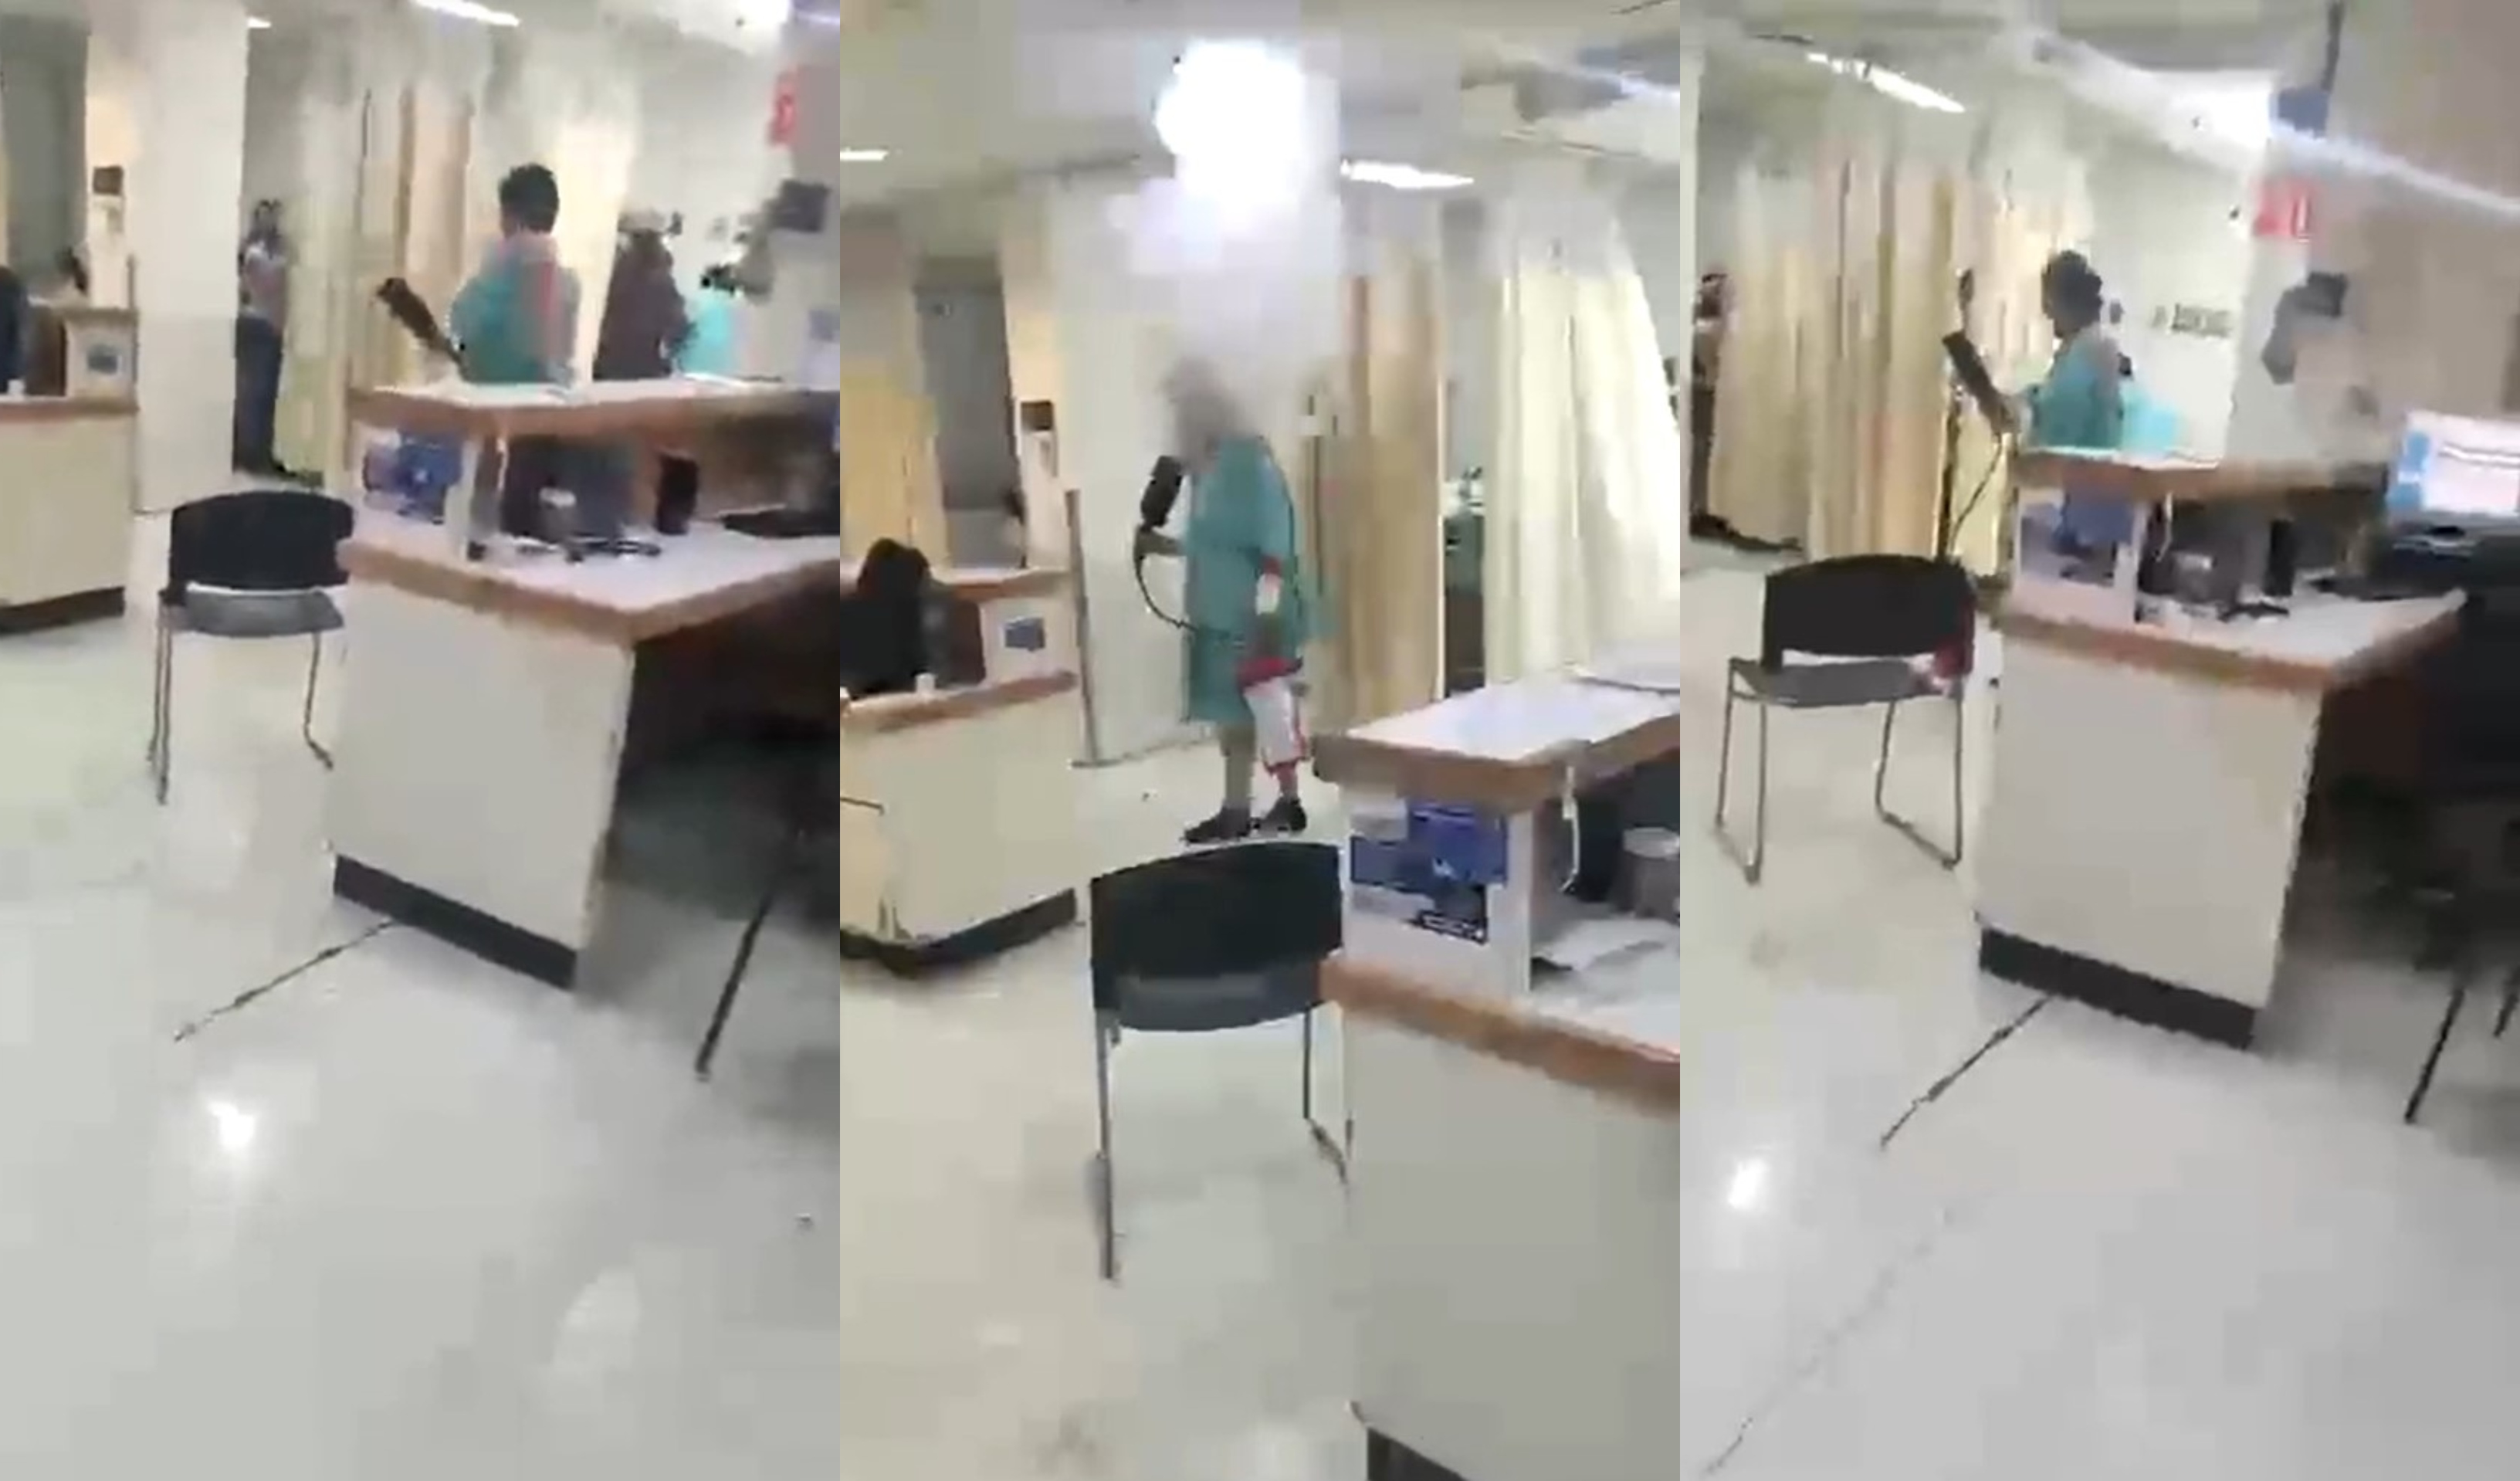 The events were recorded in a hospital located in the city of Saltillo, Coahuila (Screenshot)